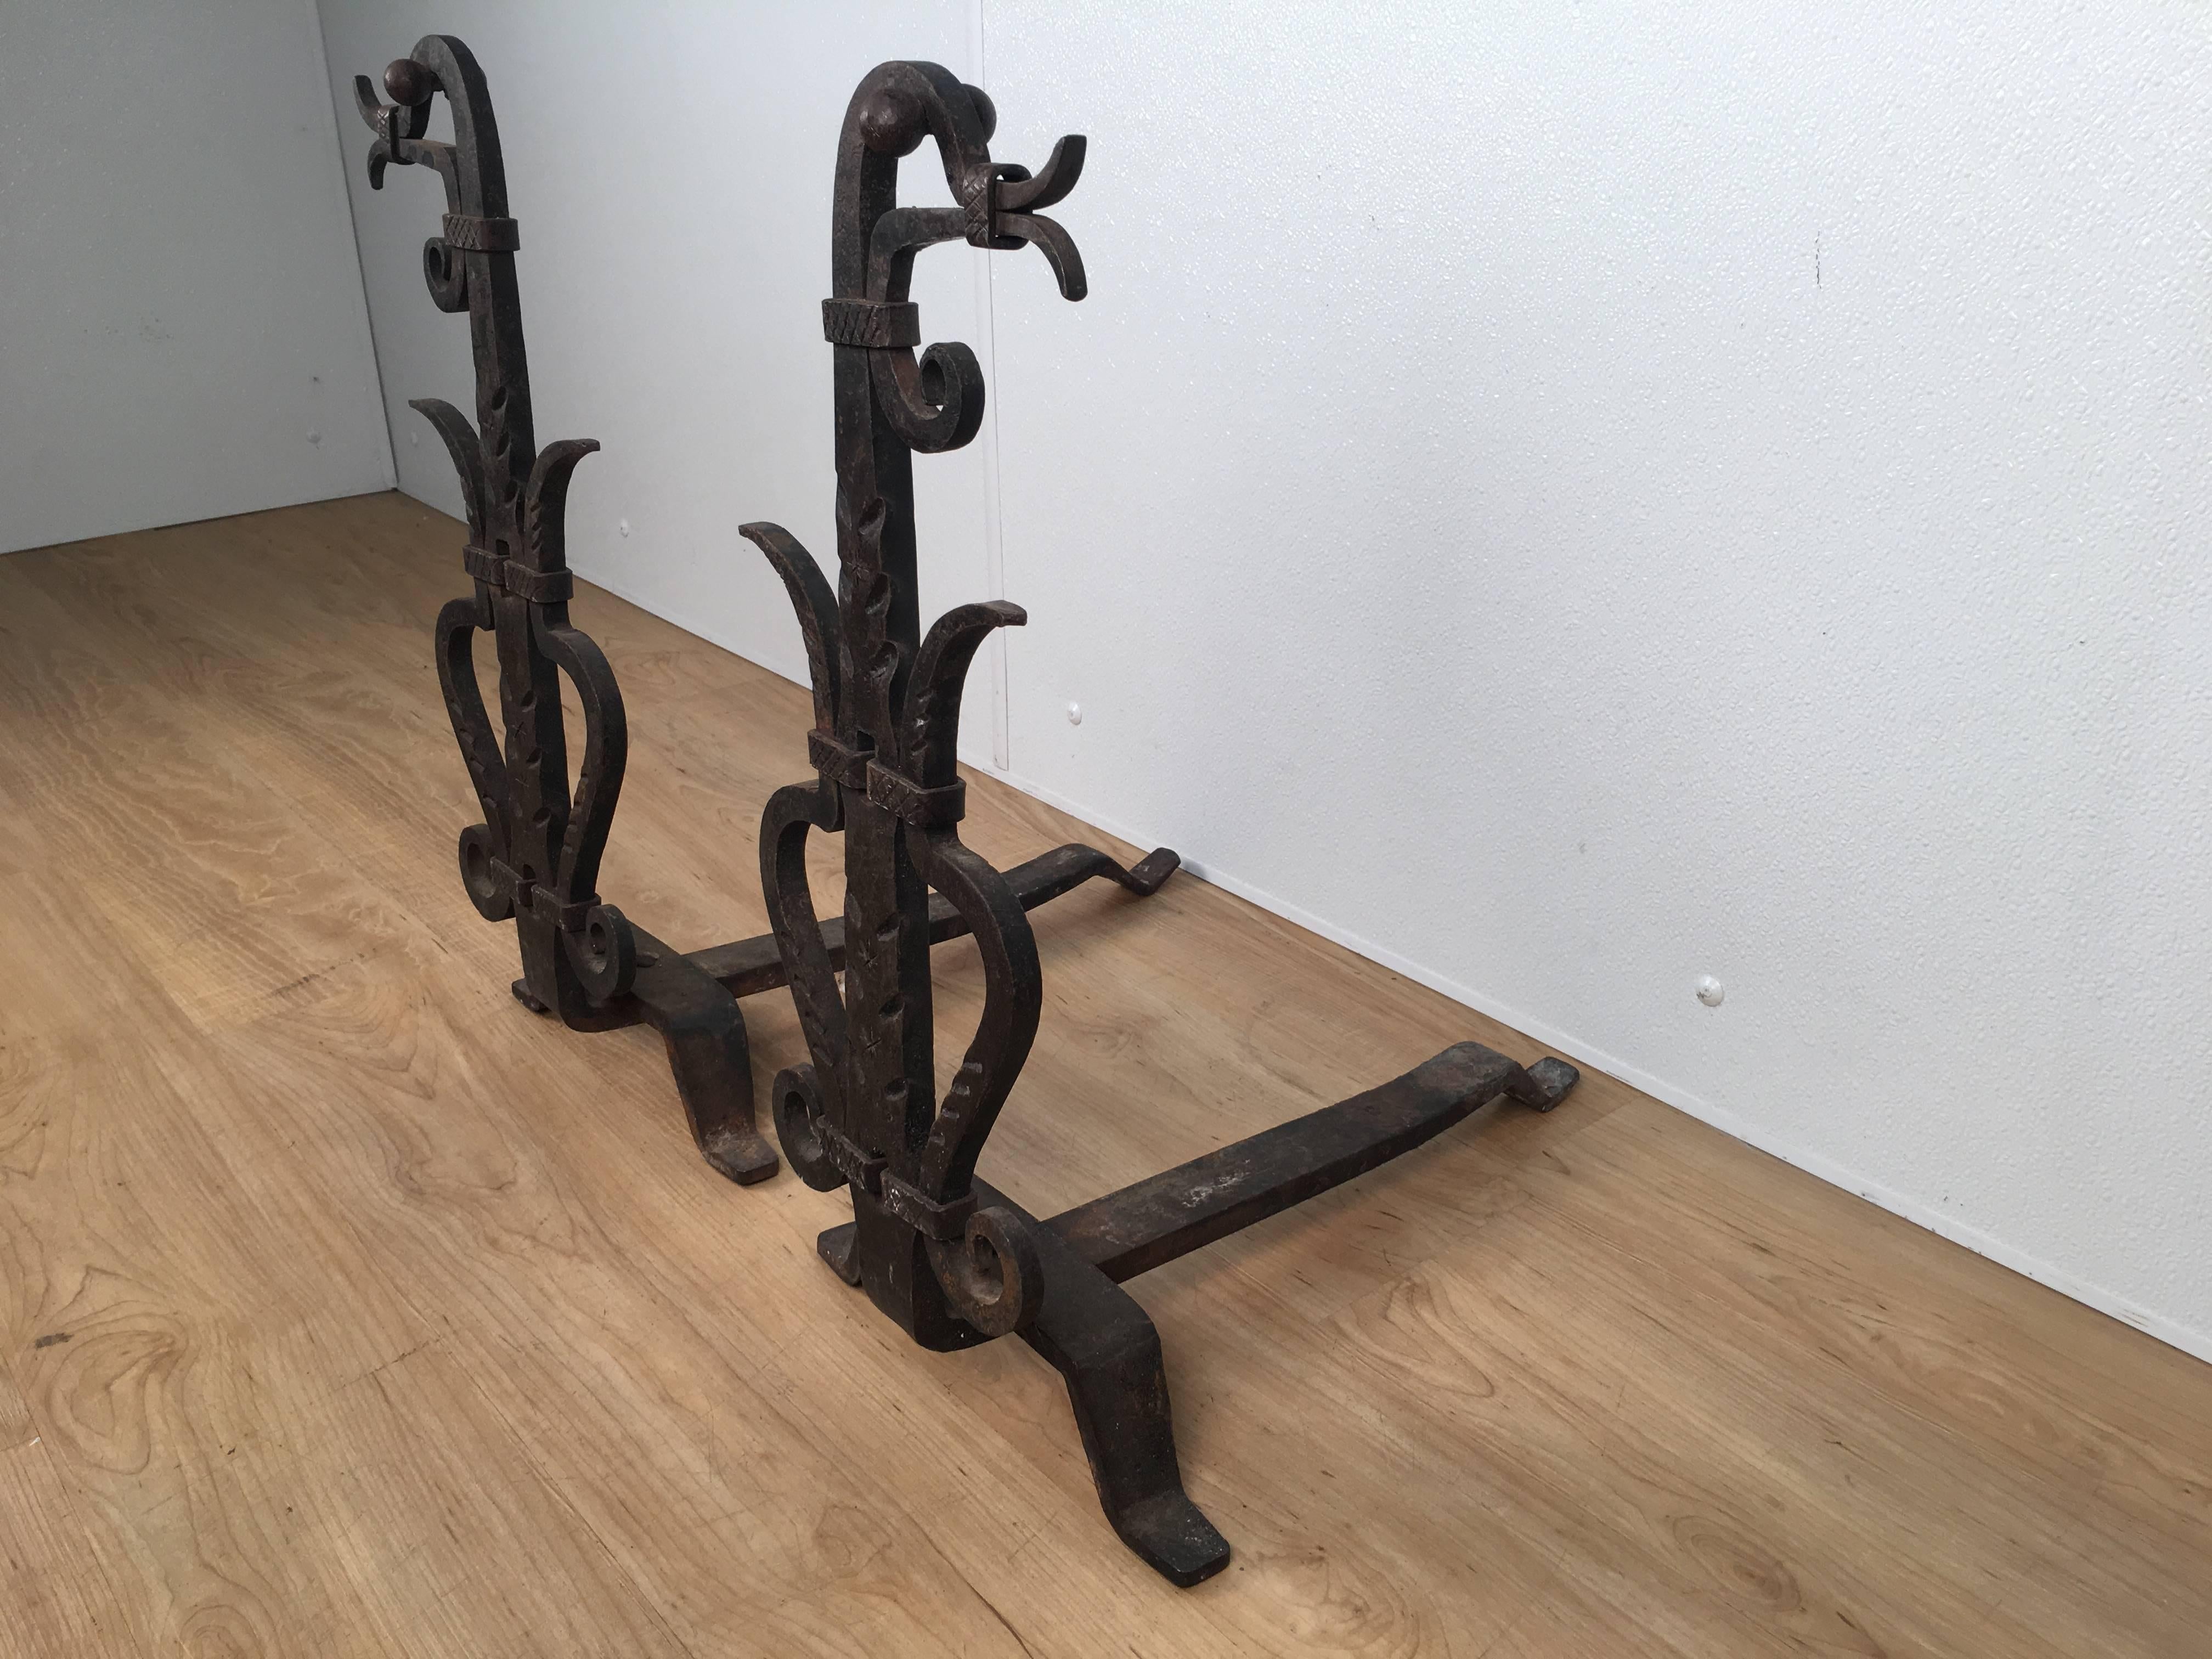 Pair of wrought iron figural andirons, each one hand forged in the form of a standing bird, facing left and right.